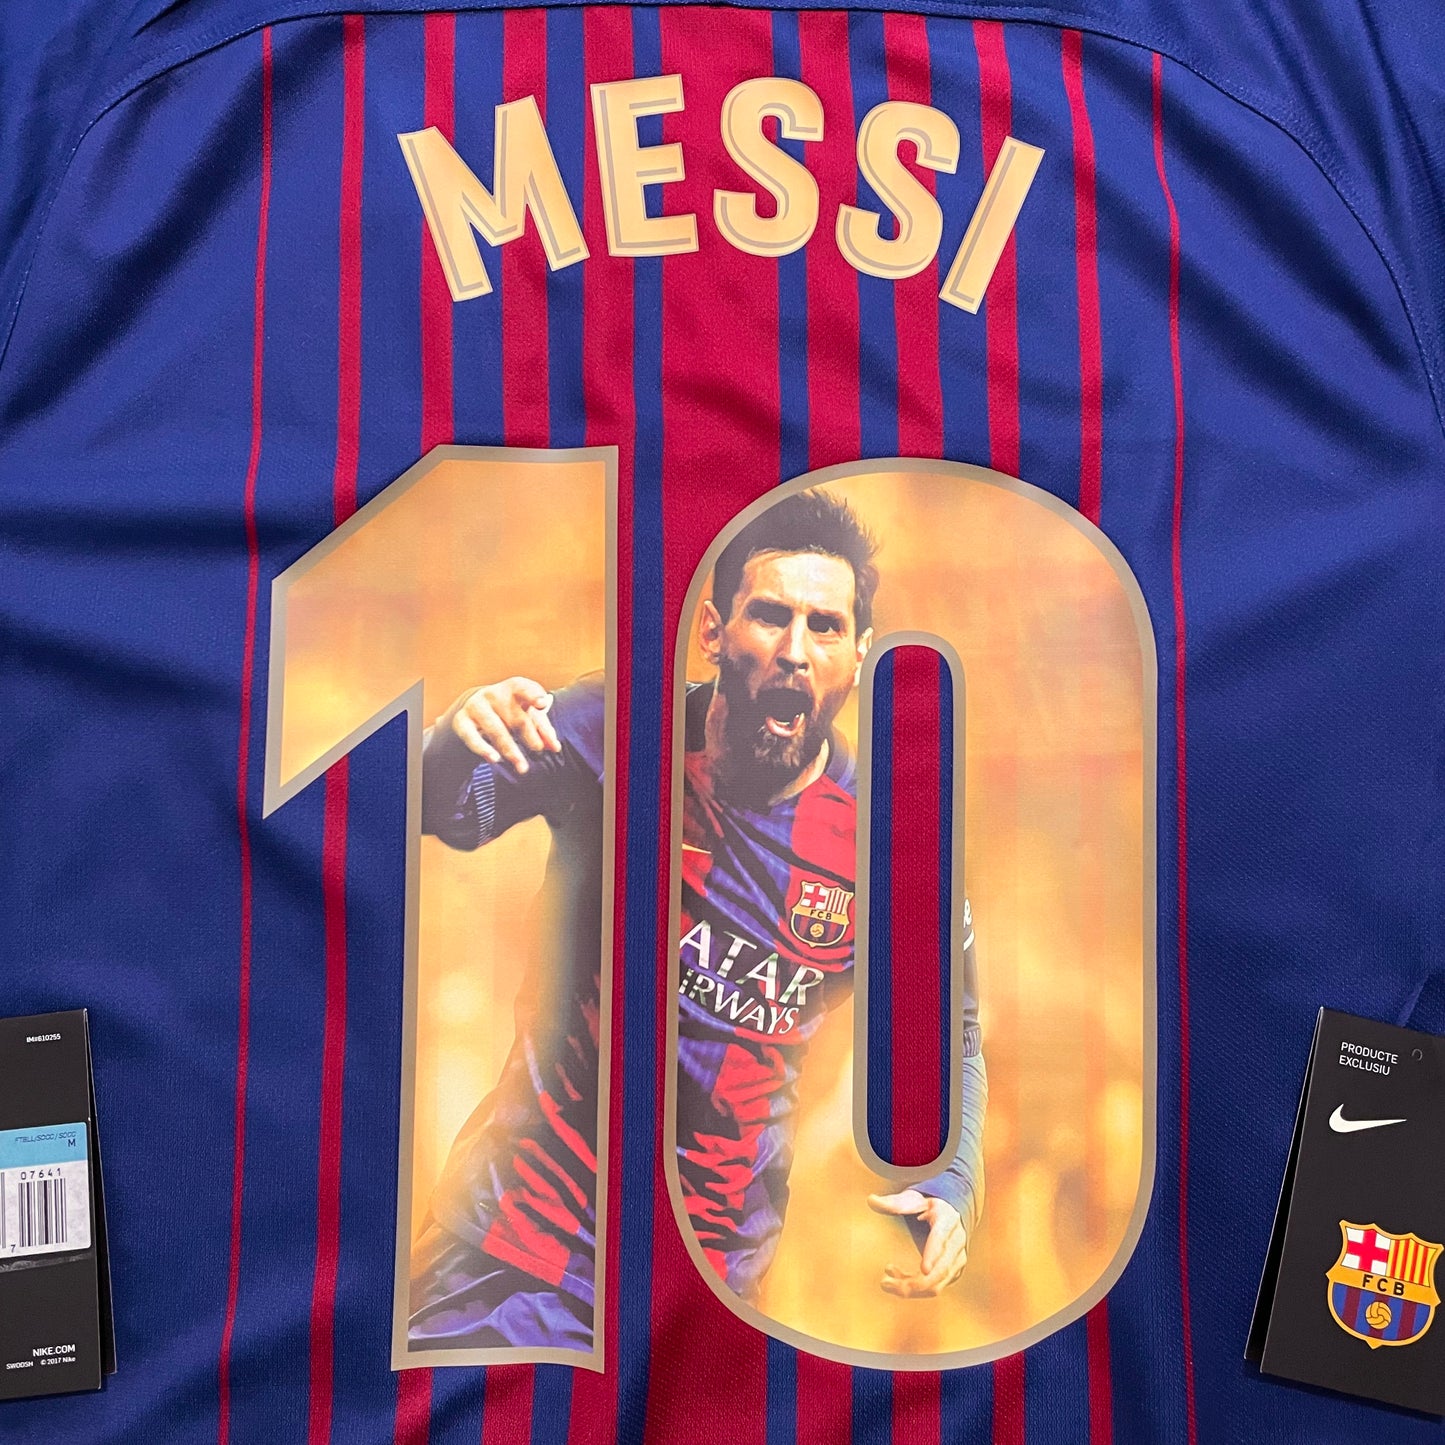 2017-2018 FC Barcelona home shirt #10 Messi (Tribute Number) (M)